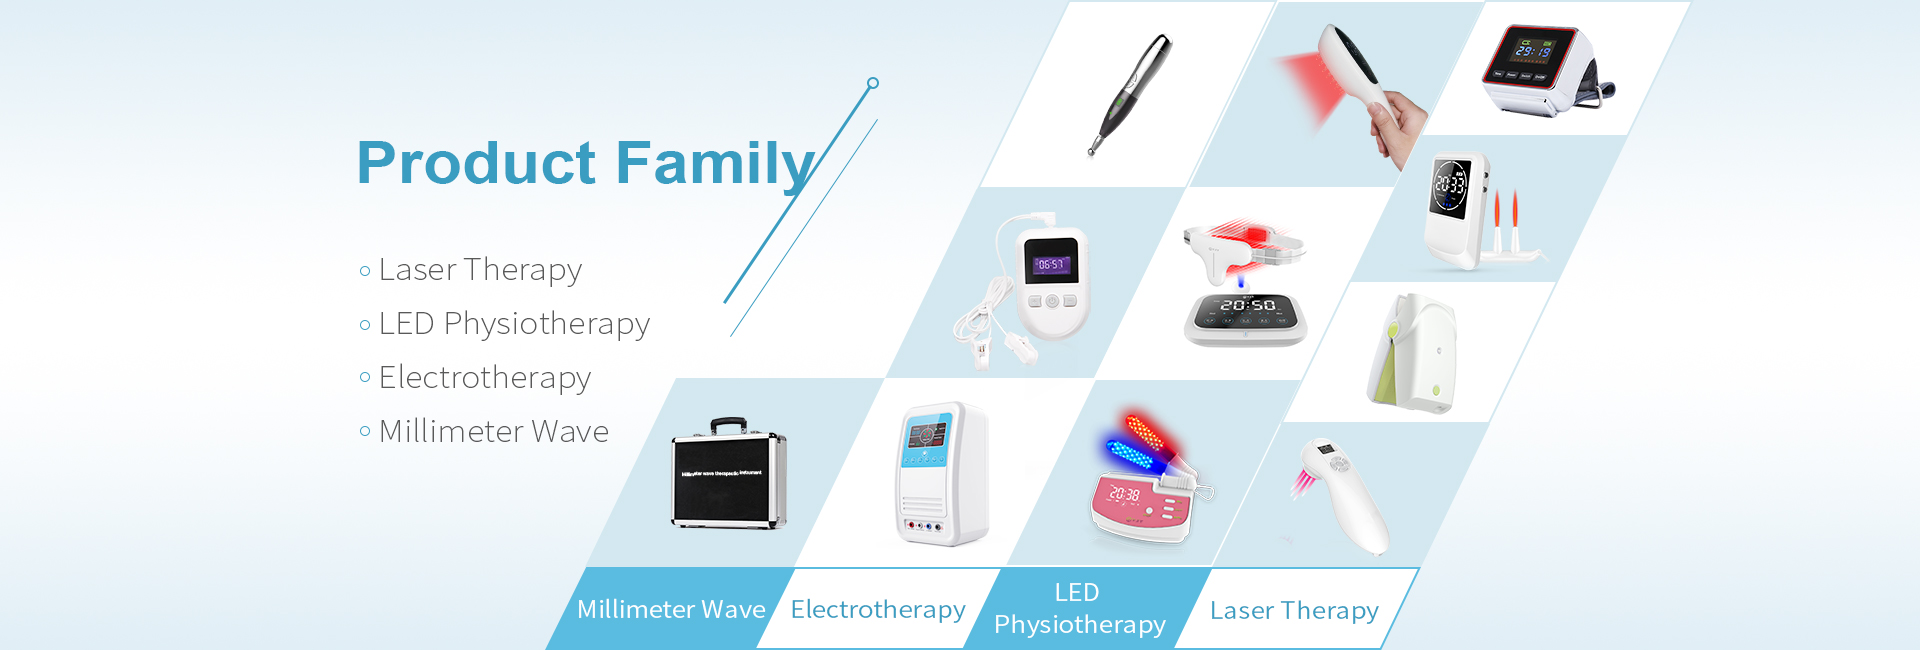 LED Therapy light